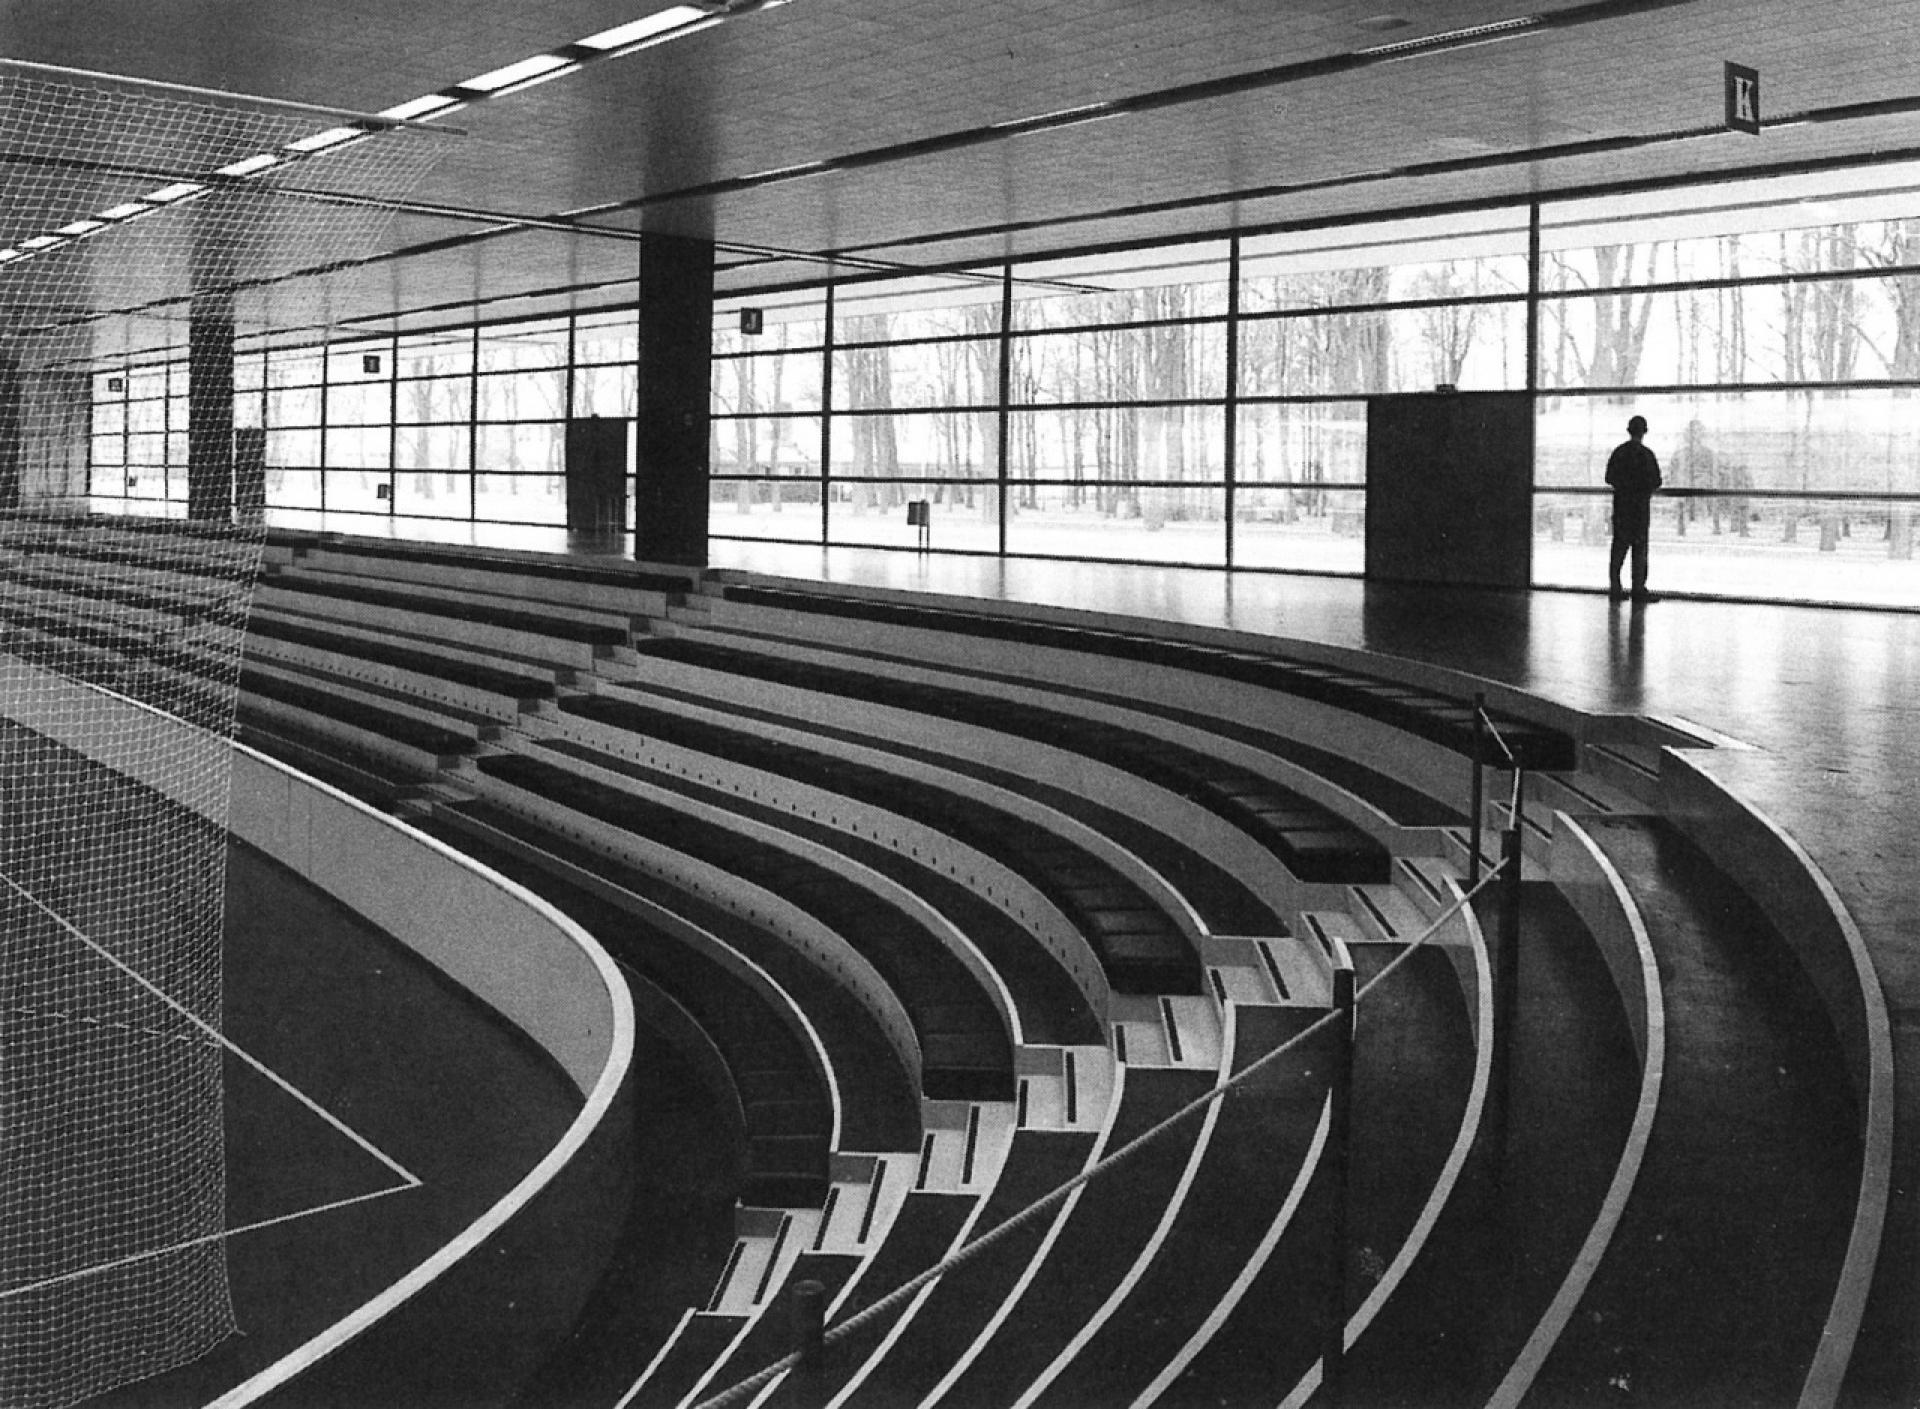 The ball field and the bleachers as depression in the plinth. | © Dissing + Weitling’s archives, from: Carsten Thau, Kjeld Vindum, Arne Jacobsen, p.457.